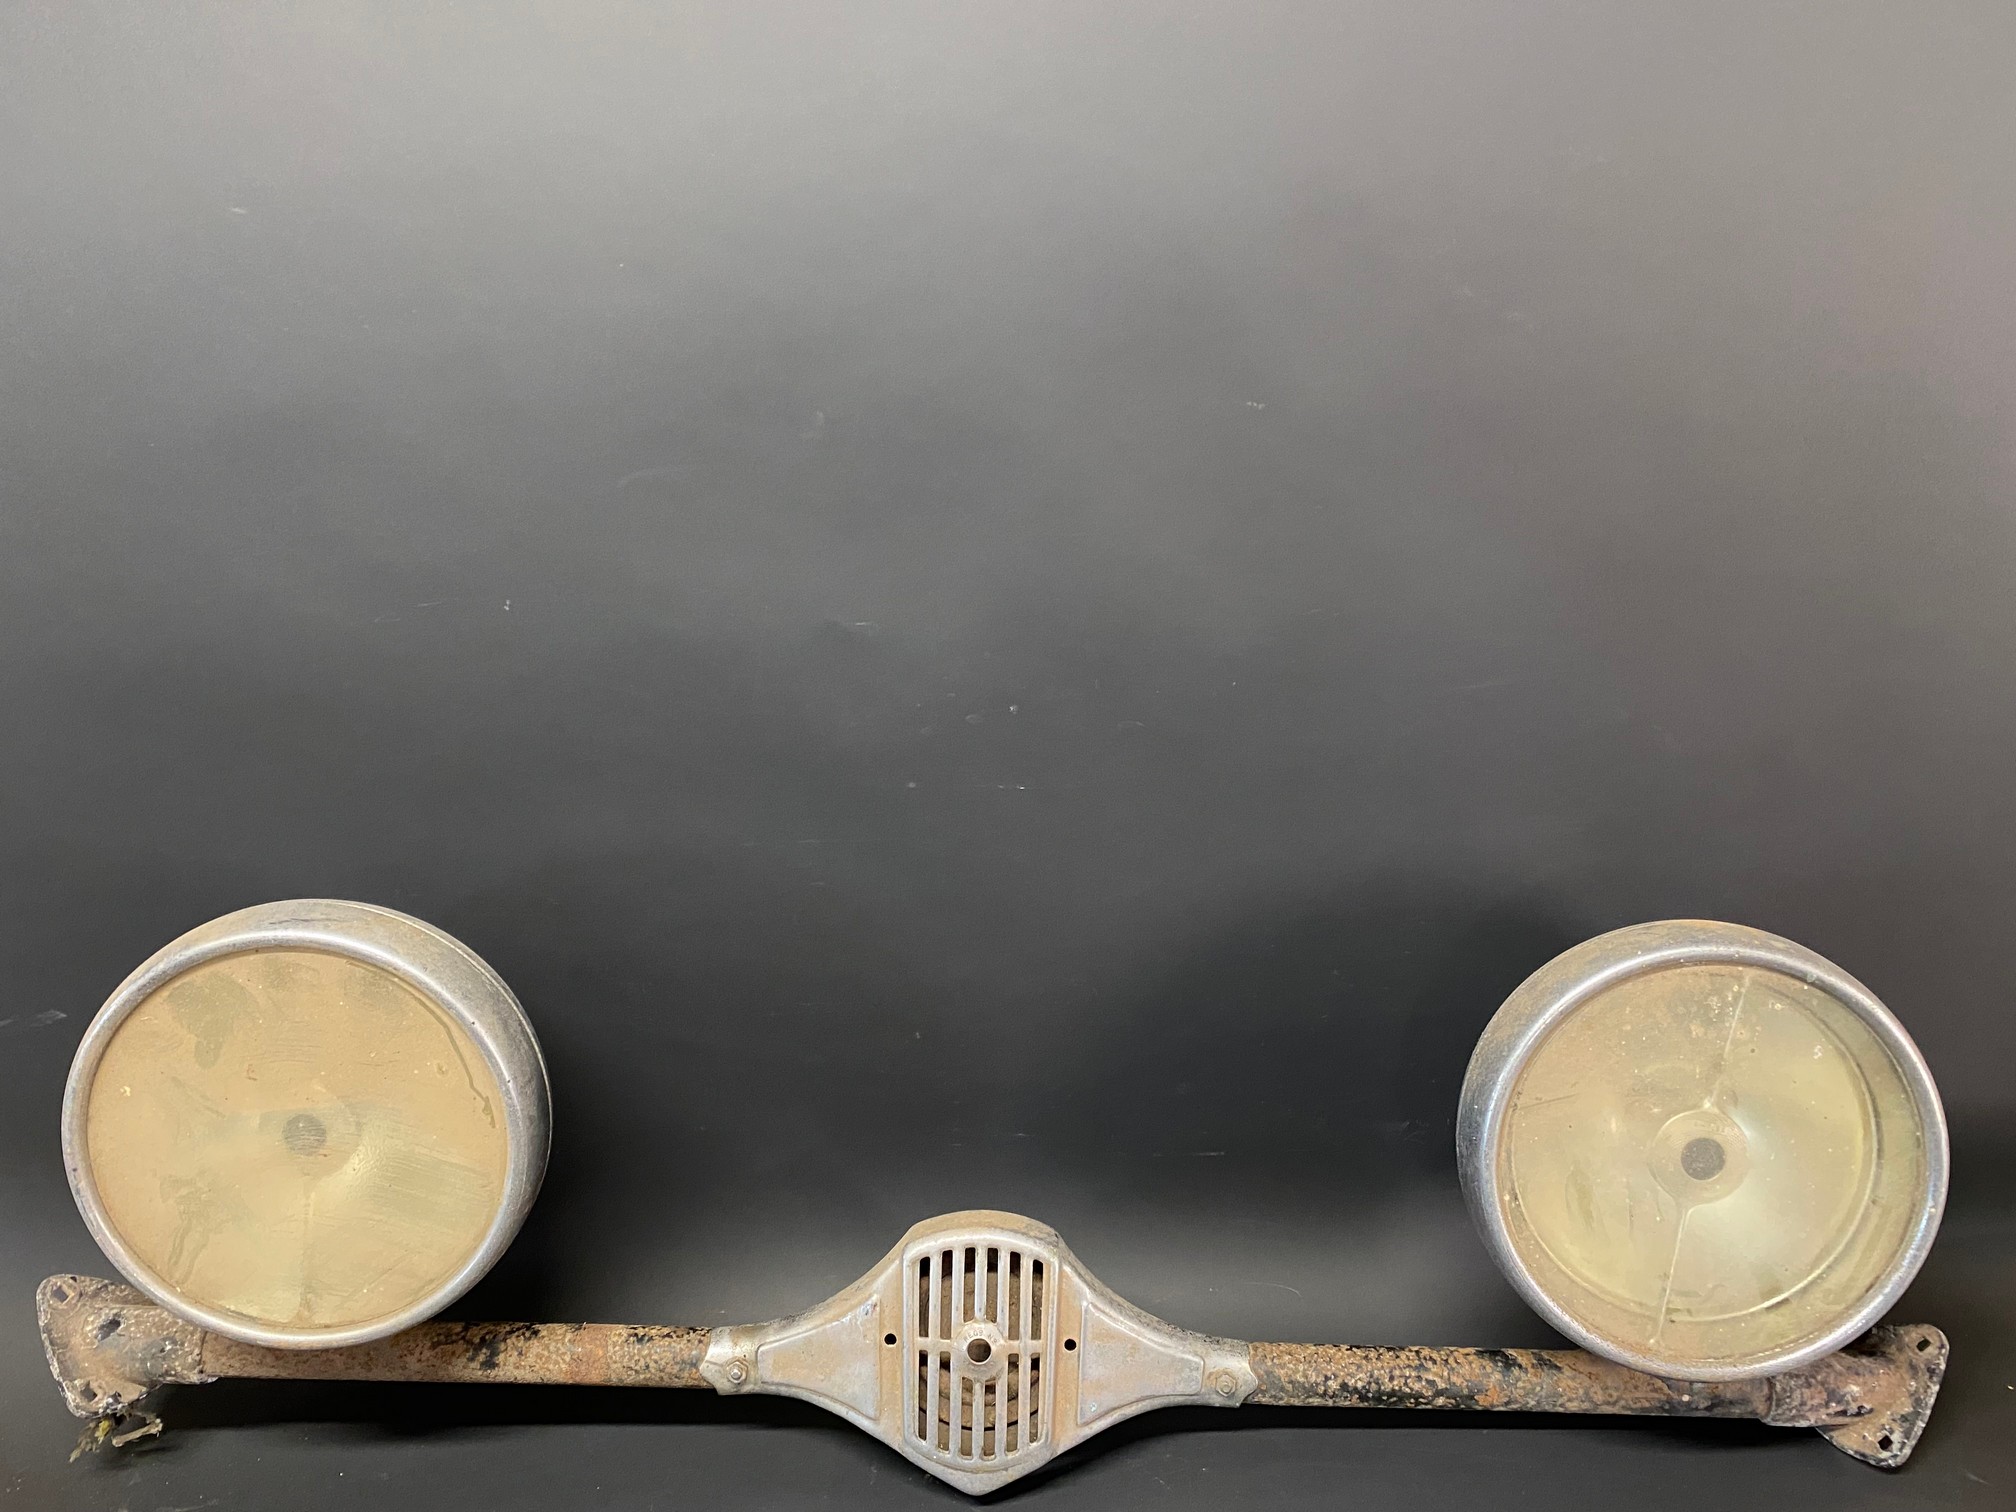 A pair of Lucas L165S headlamps on a bar that has a horn in the centre.